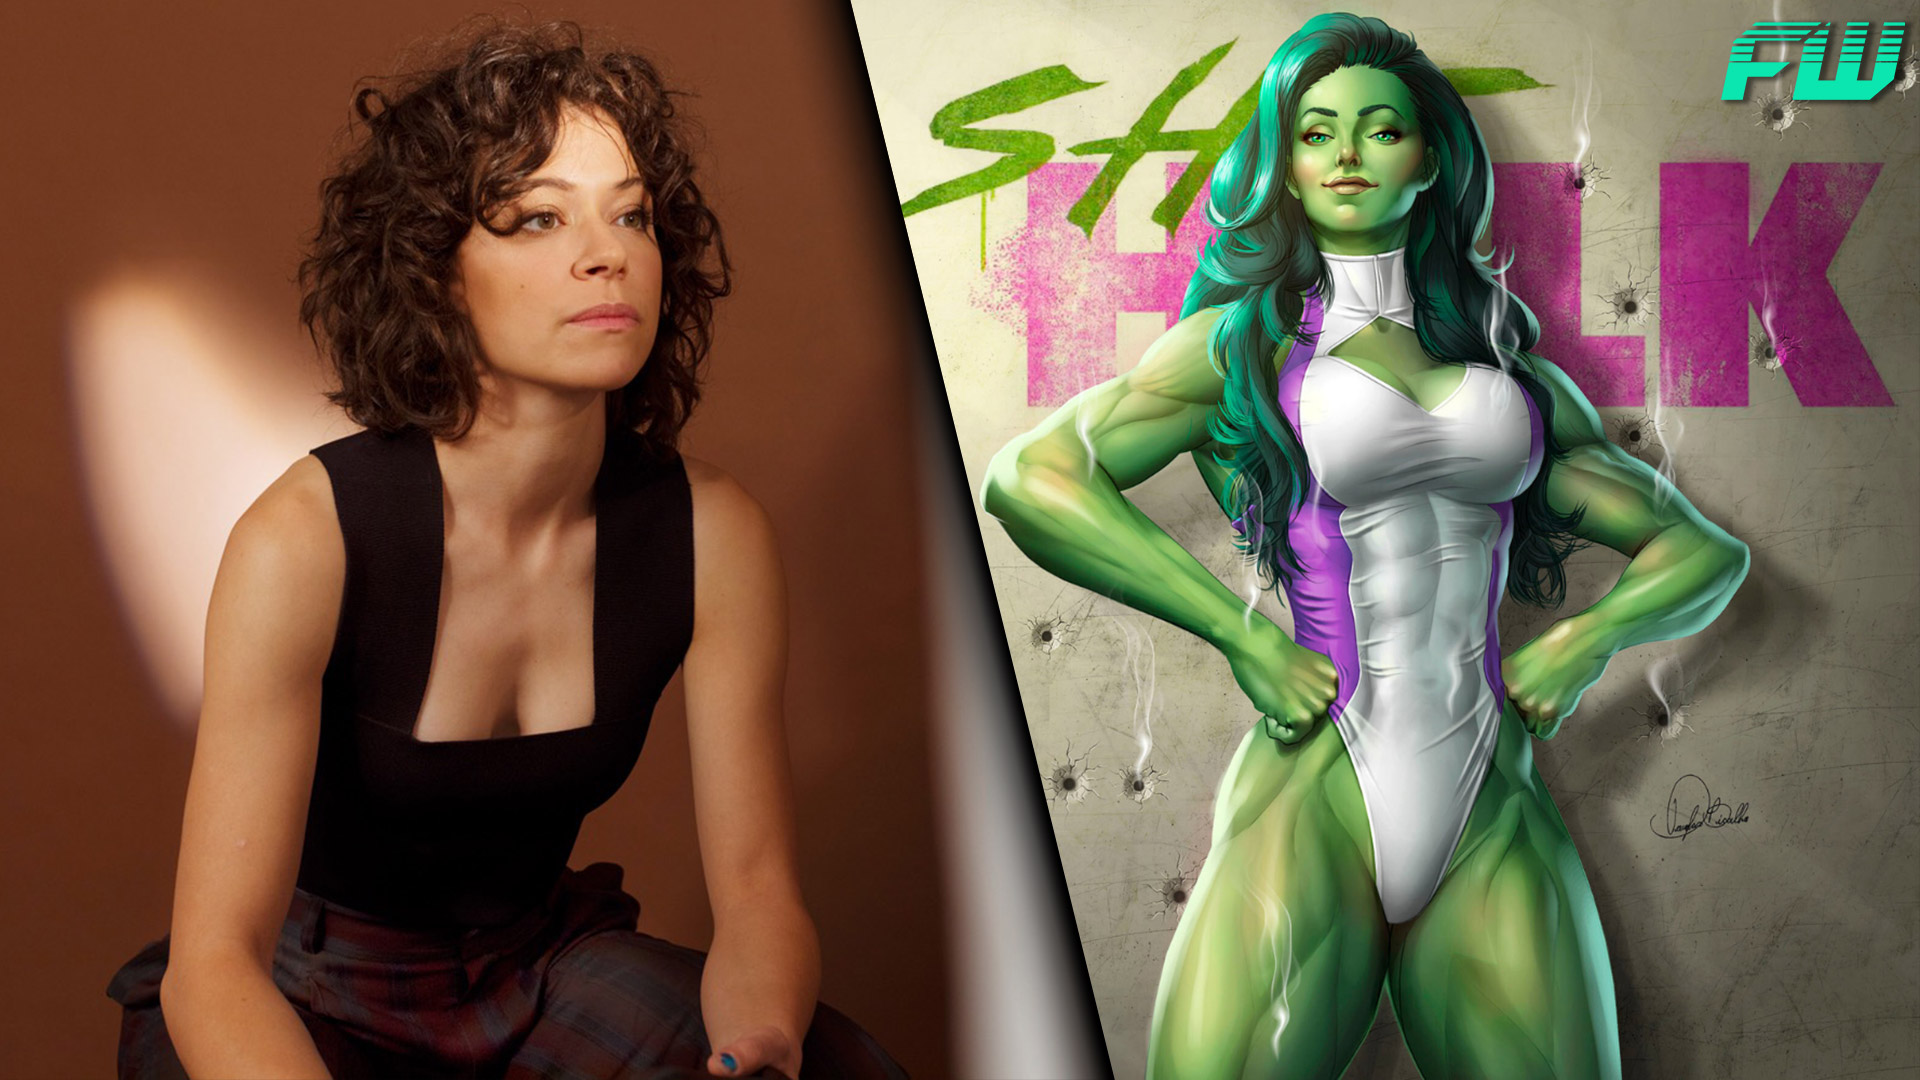 She-Hulk”: All Details about the upcoming film of Lady Hulk - TechnoSports